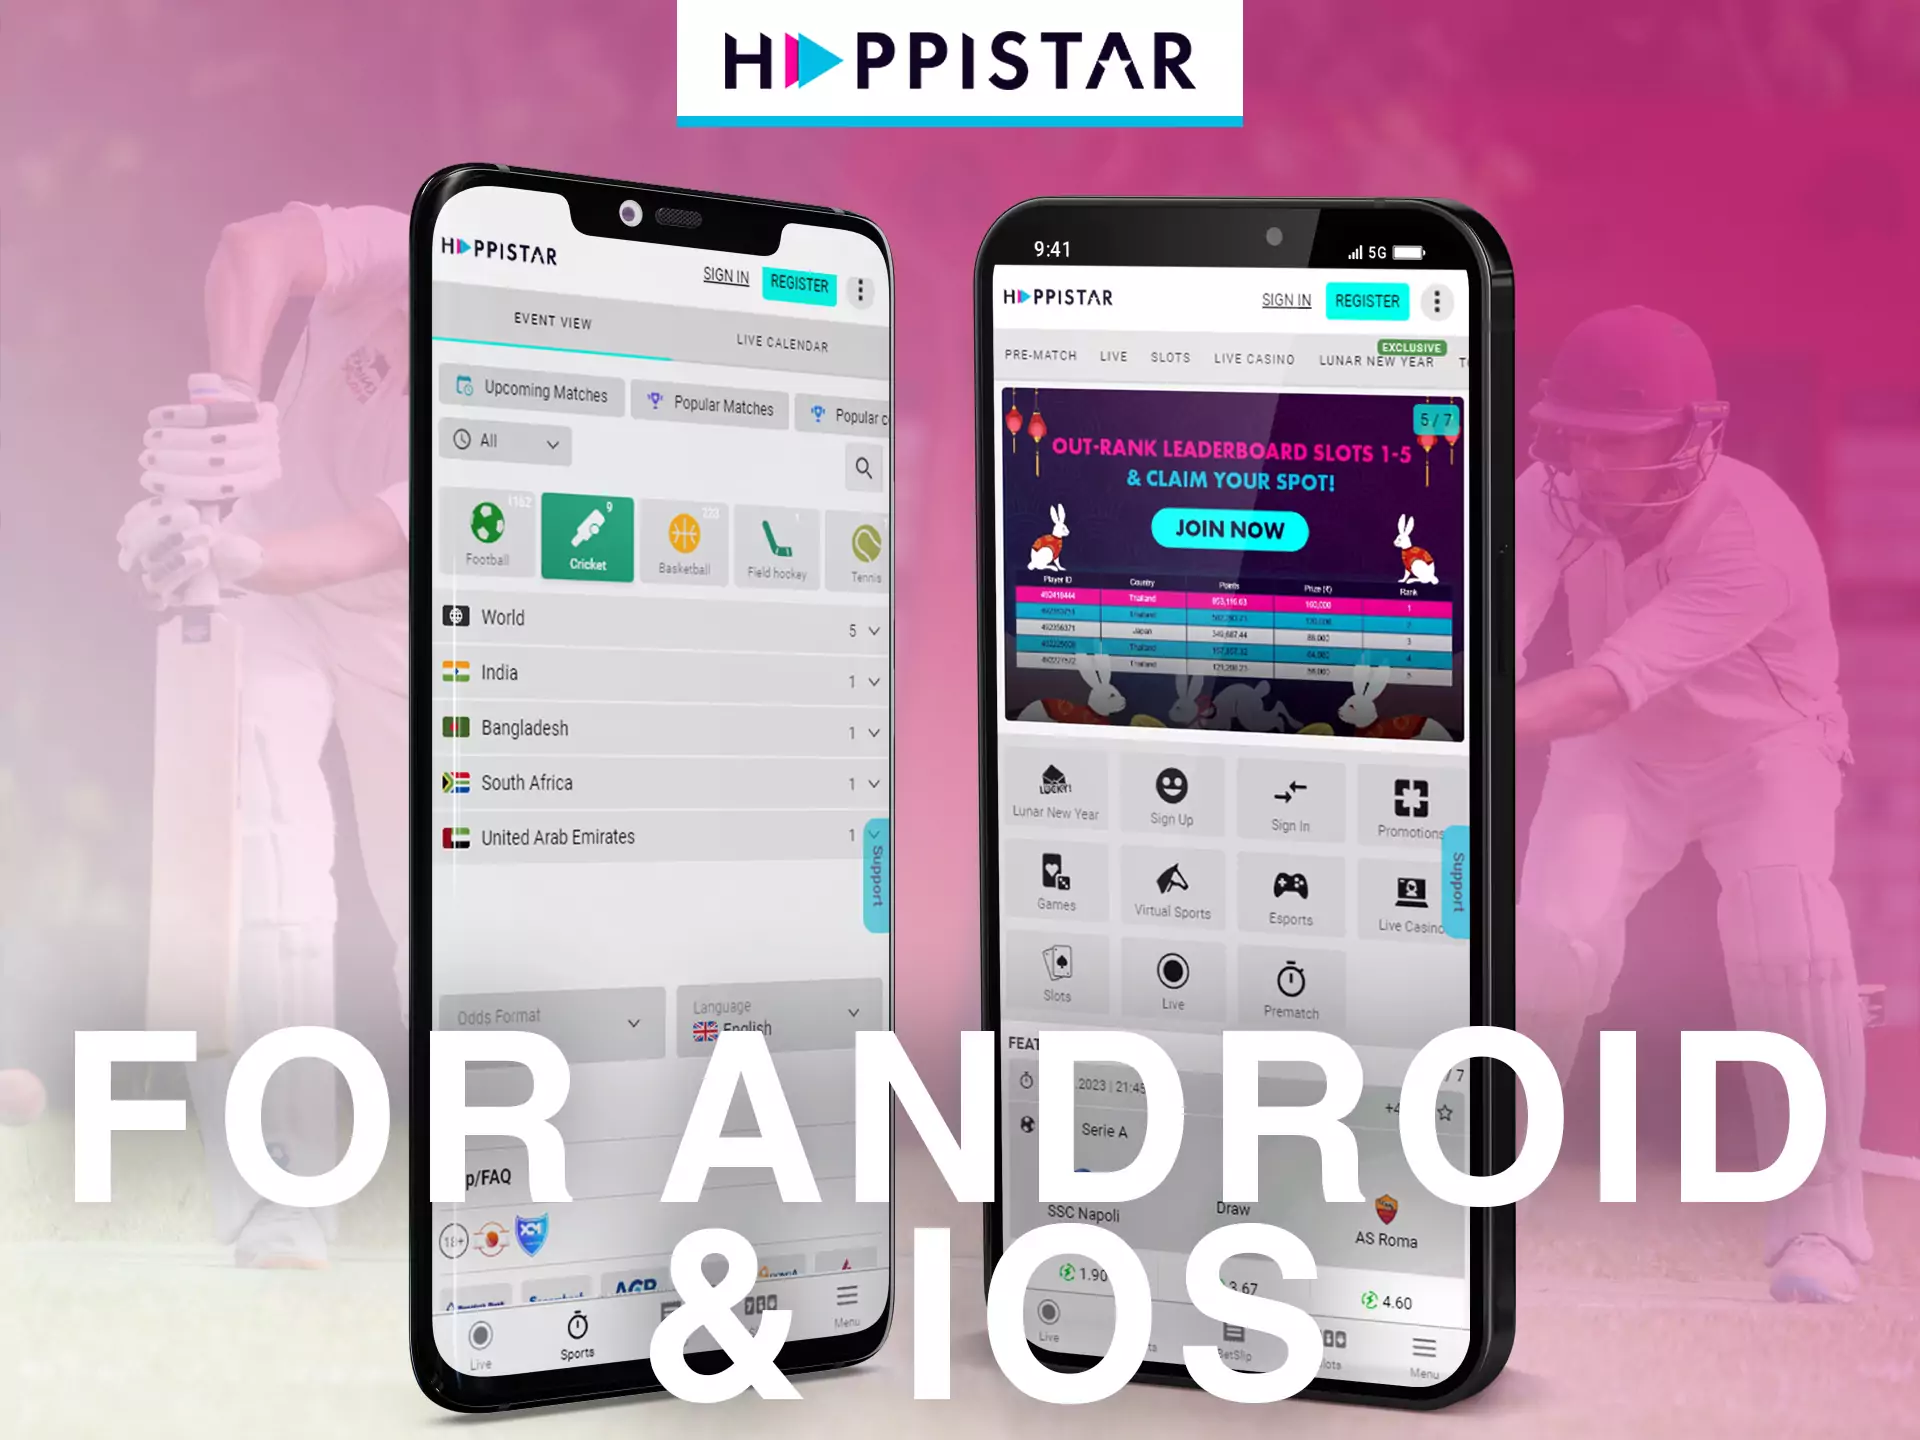 On Happistar, you can bet using your Android or iOS device.